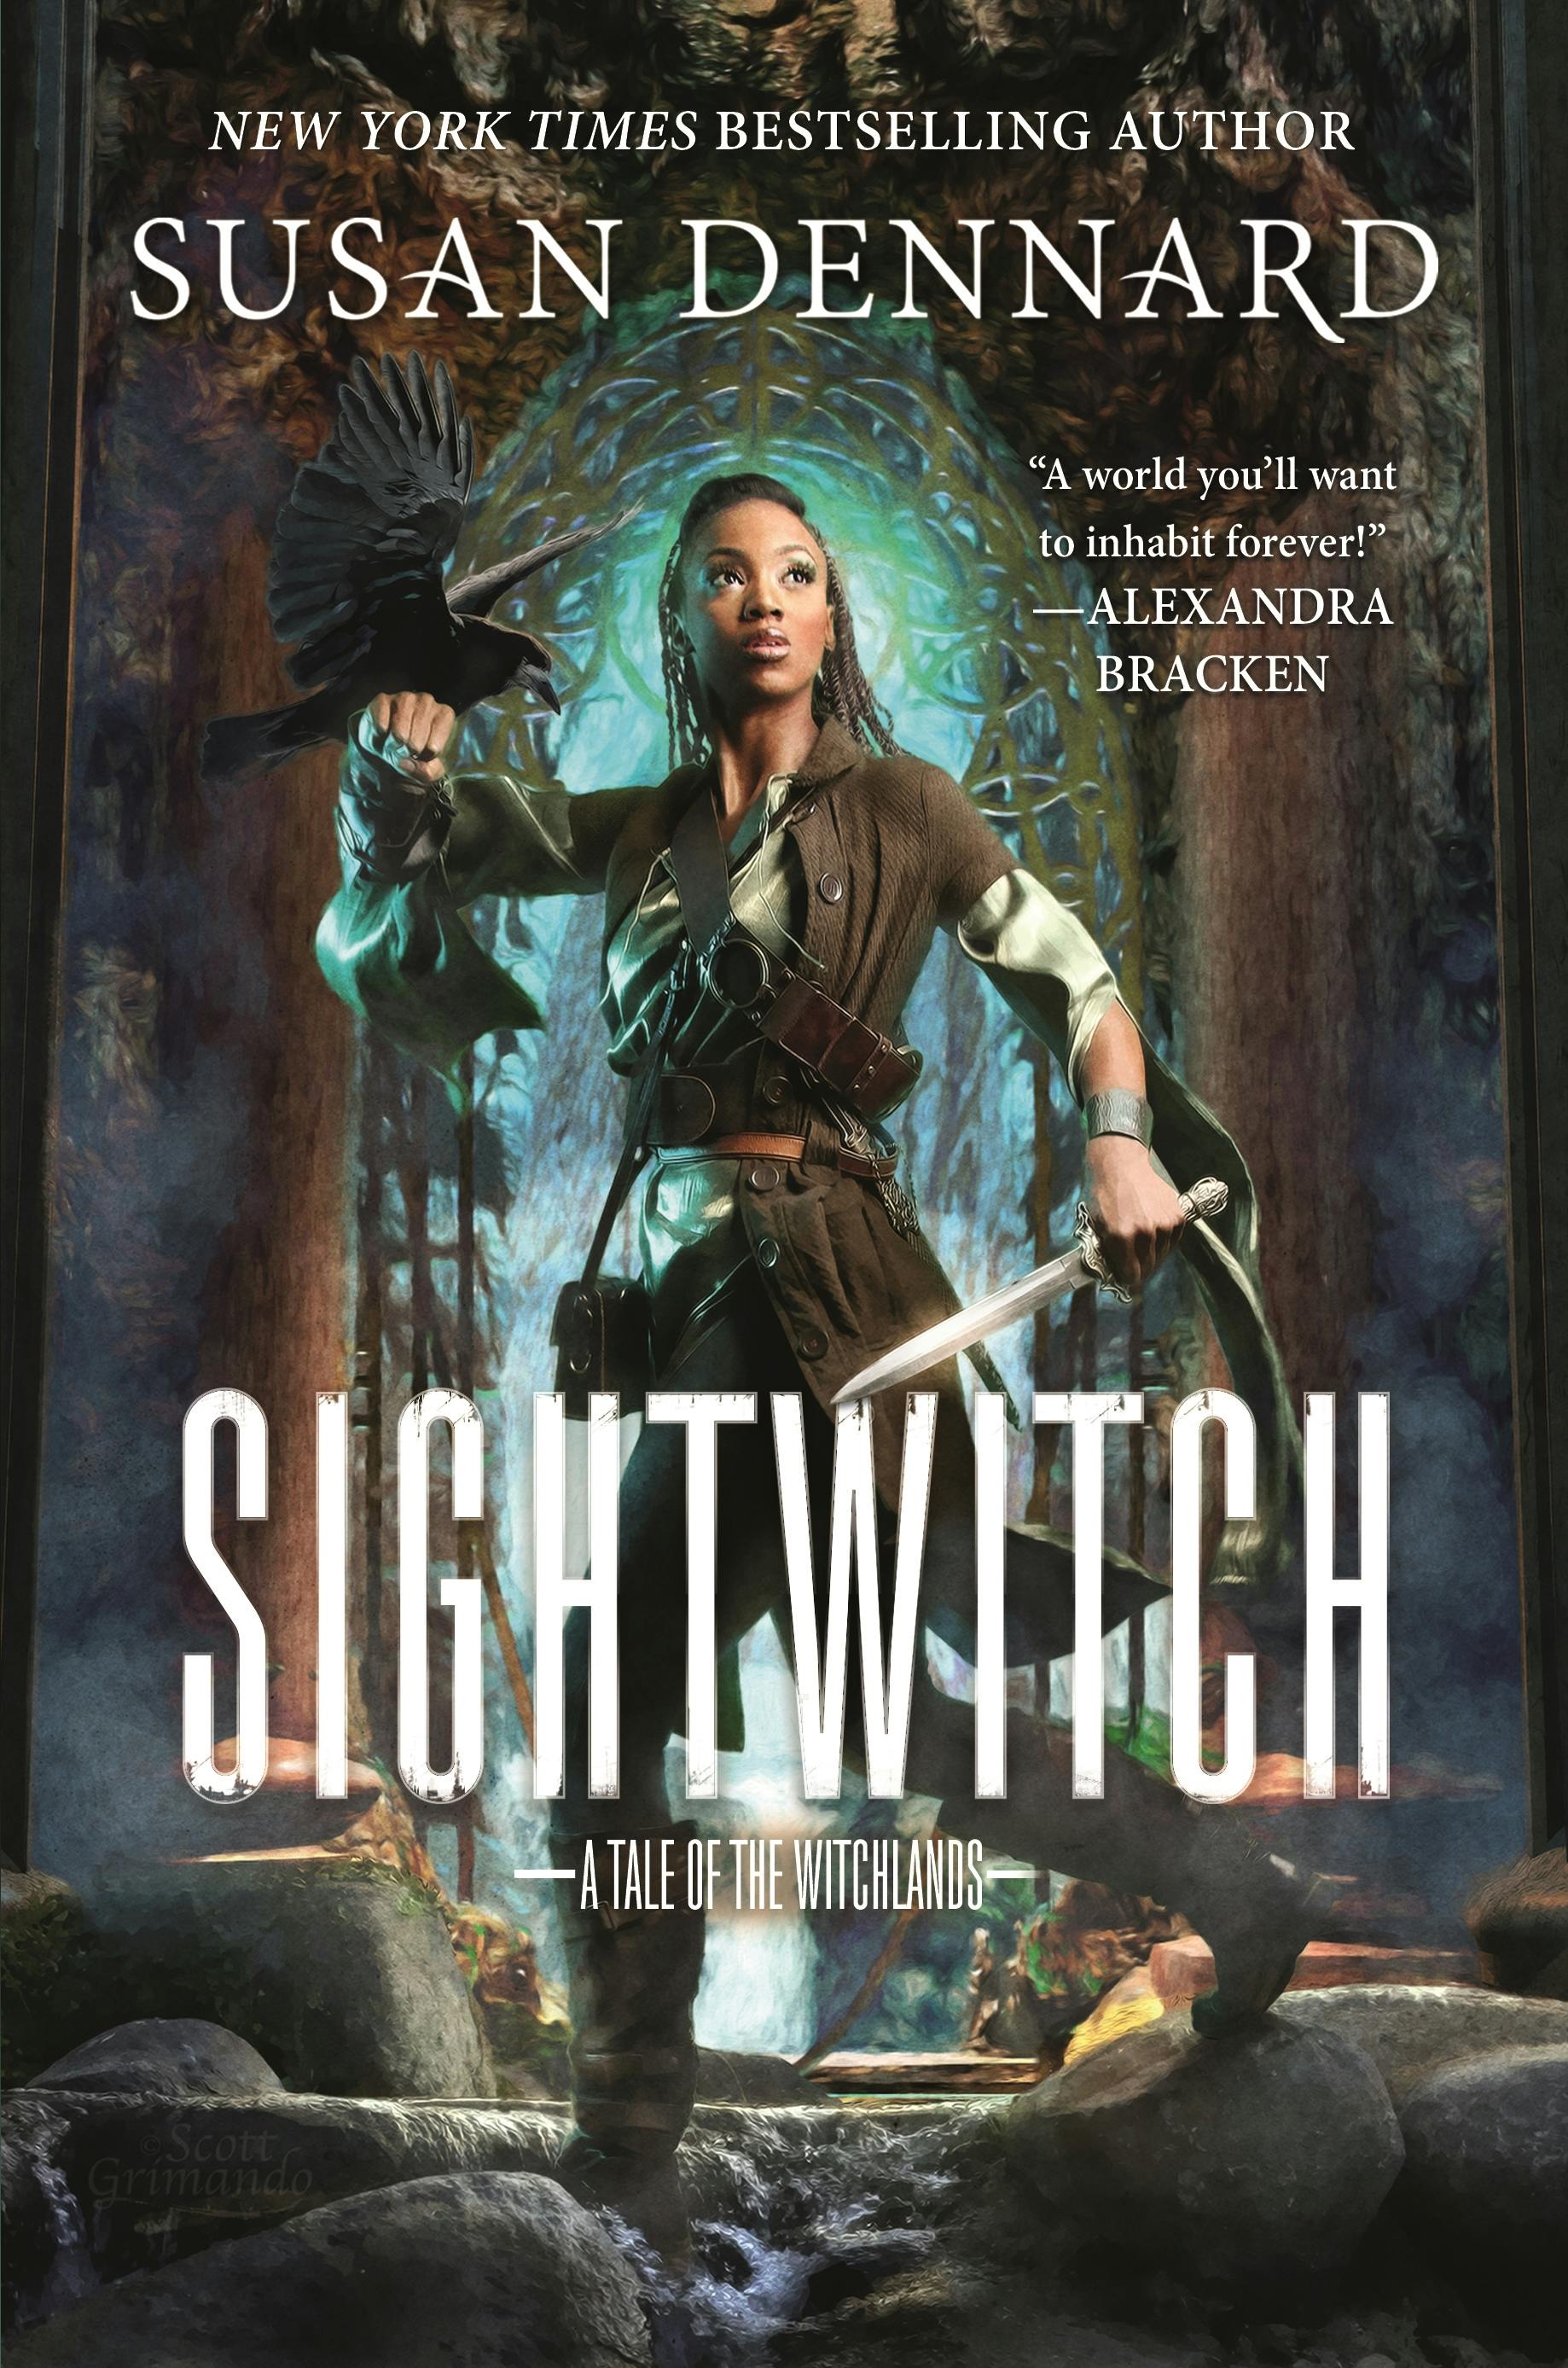 Cover for the book titled as: Sightwitch